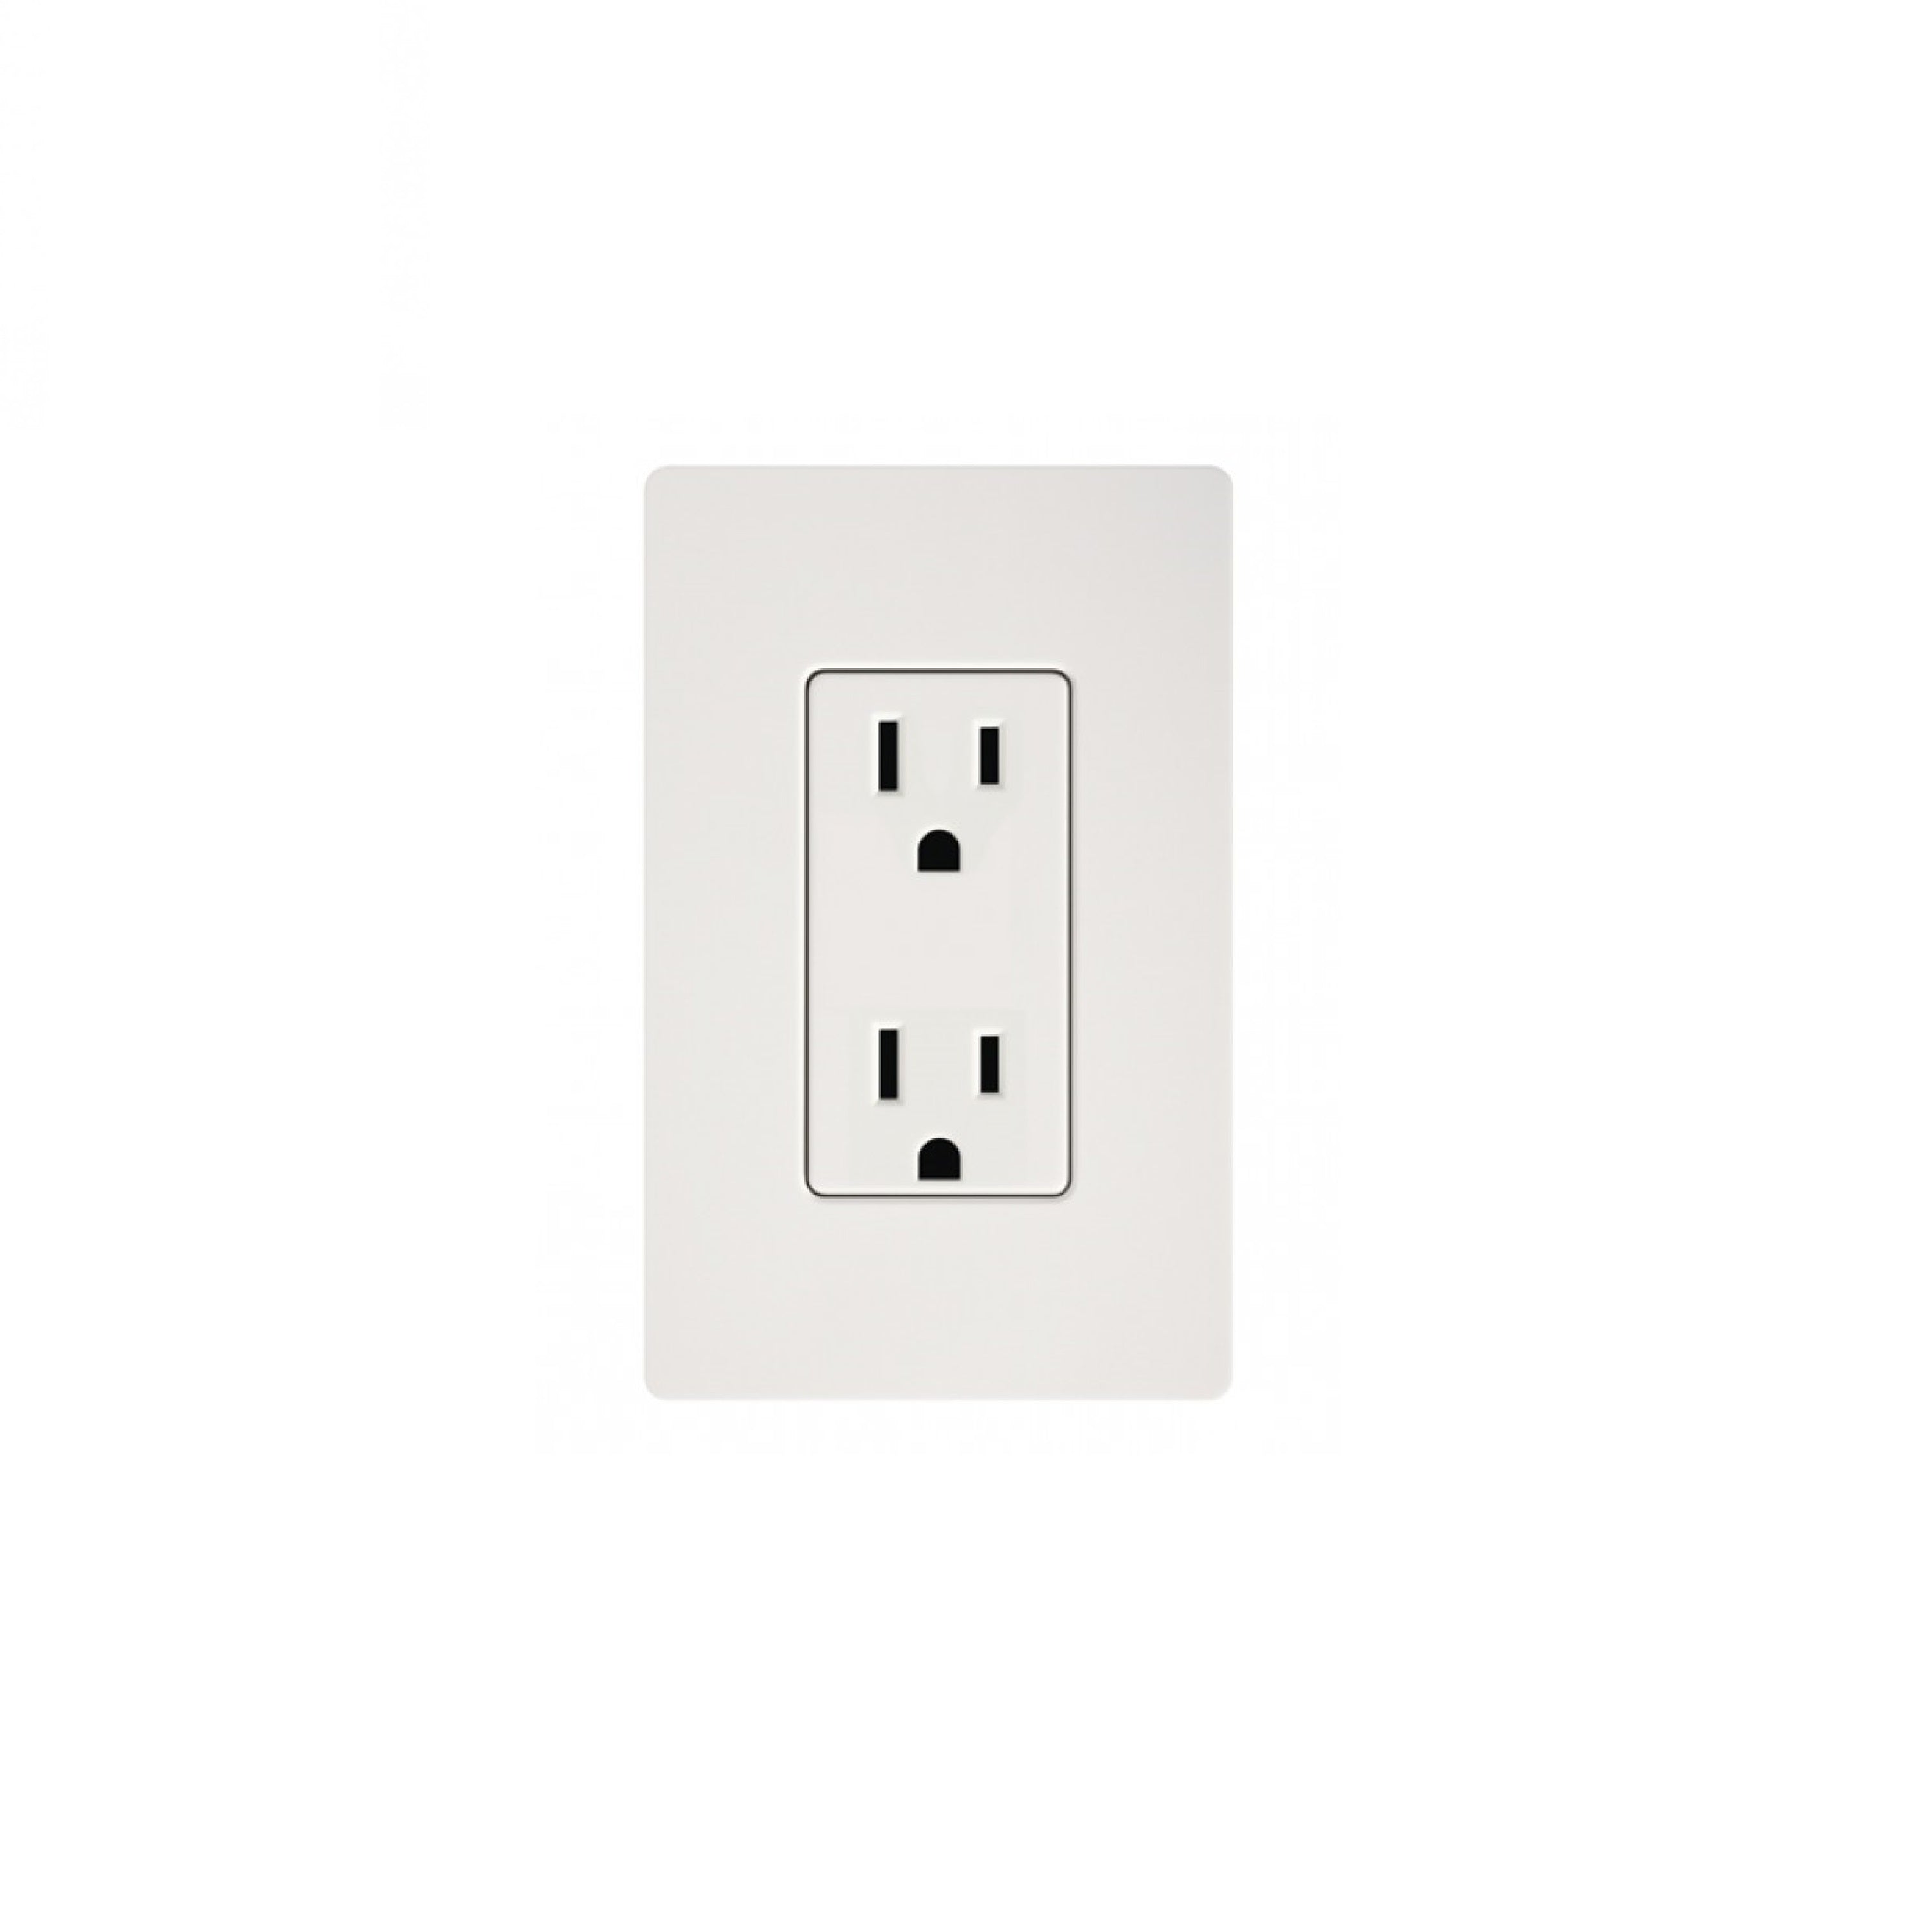 A Maxxus Saunas wall outlet with two outlets on it.